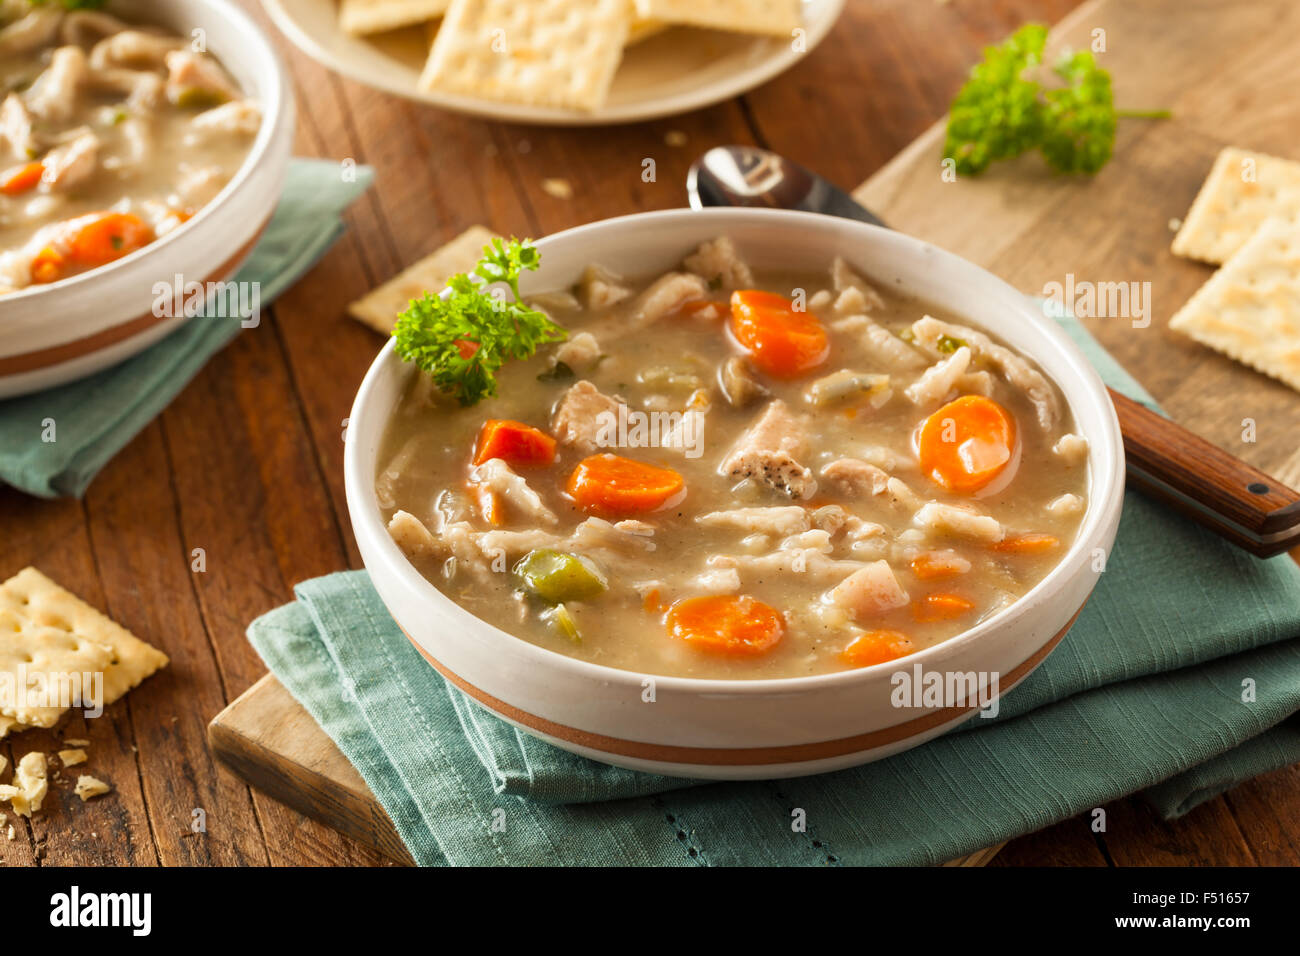 Homemade Chicken Noodle Soup with Carrots and Celery Stock Photo